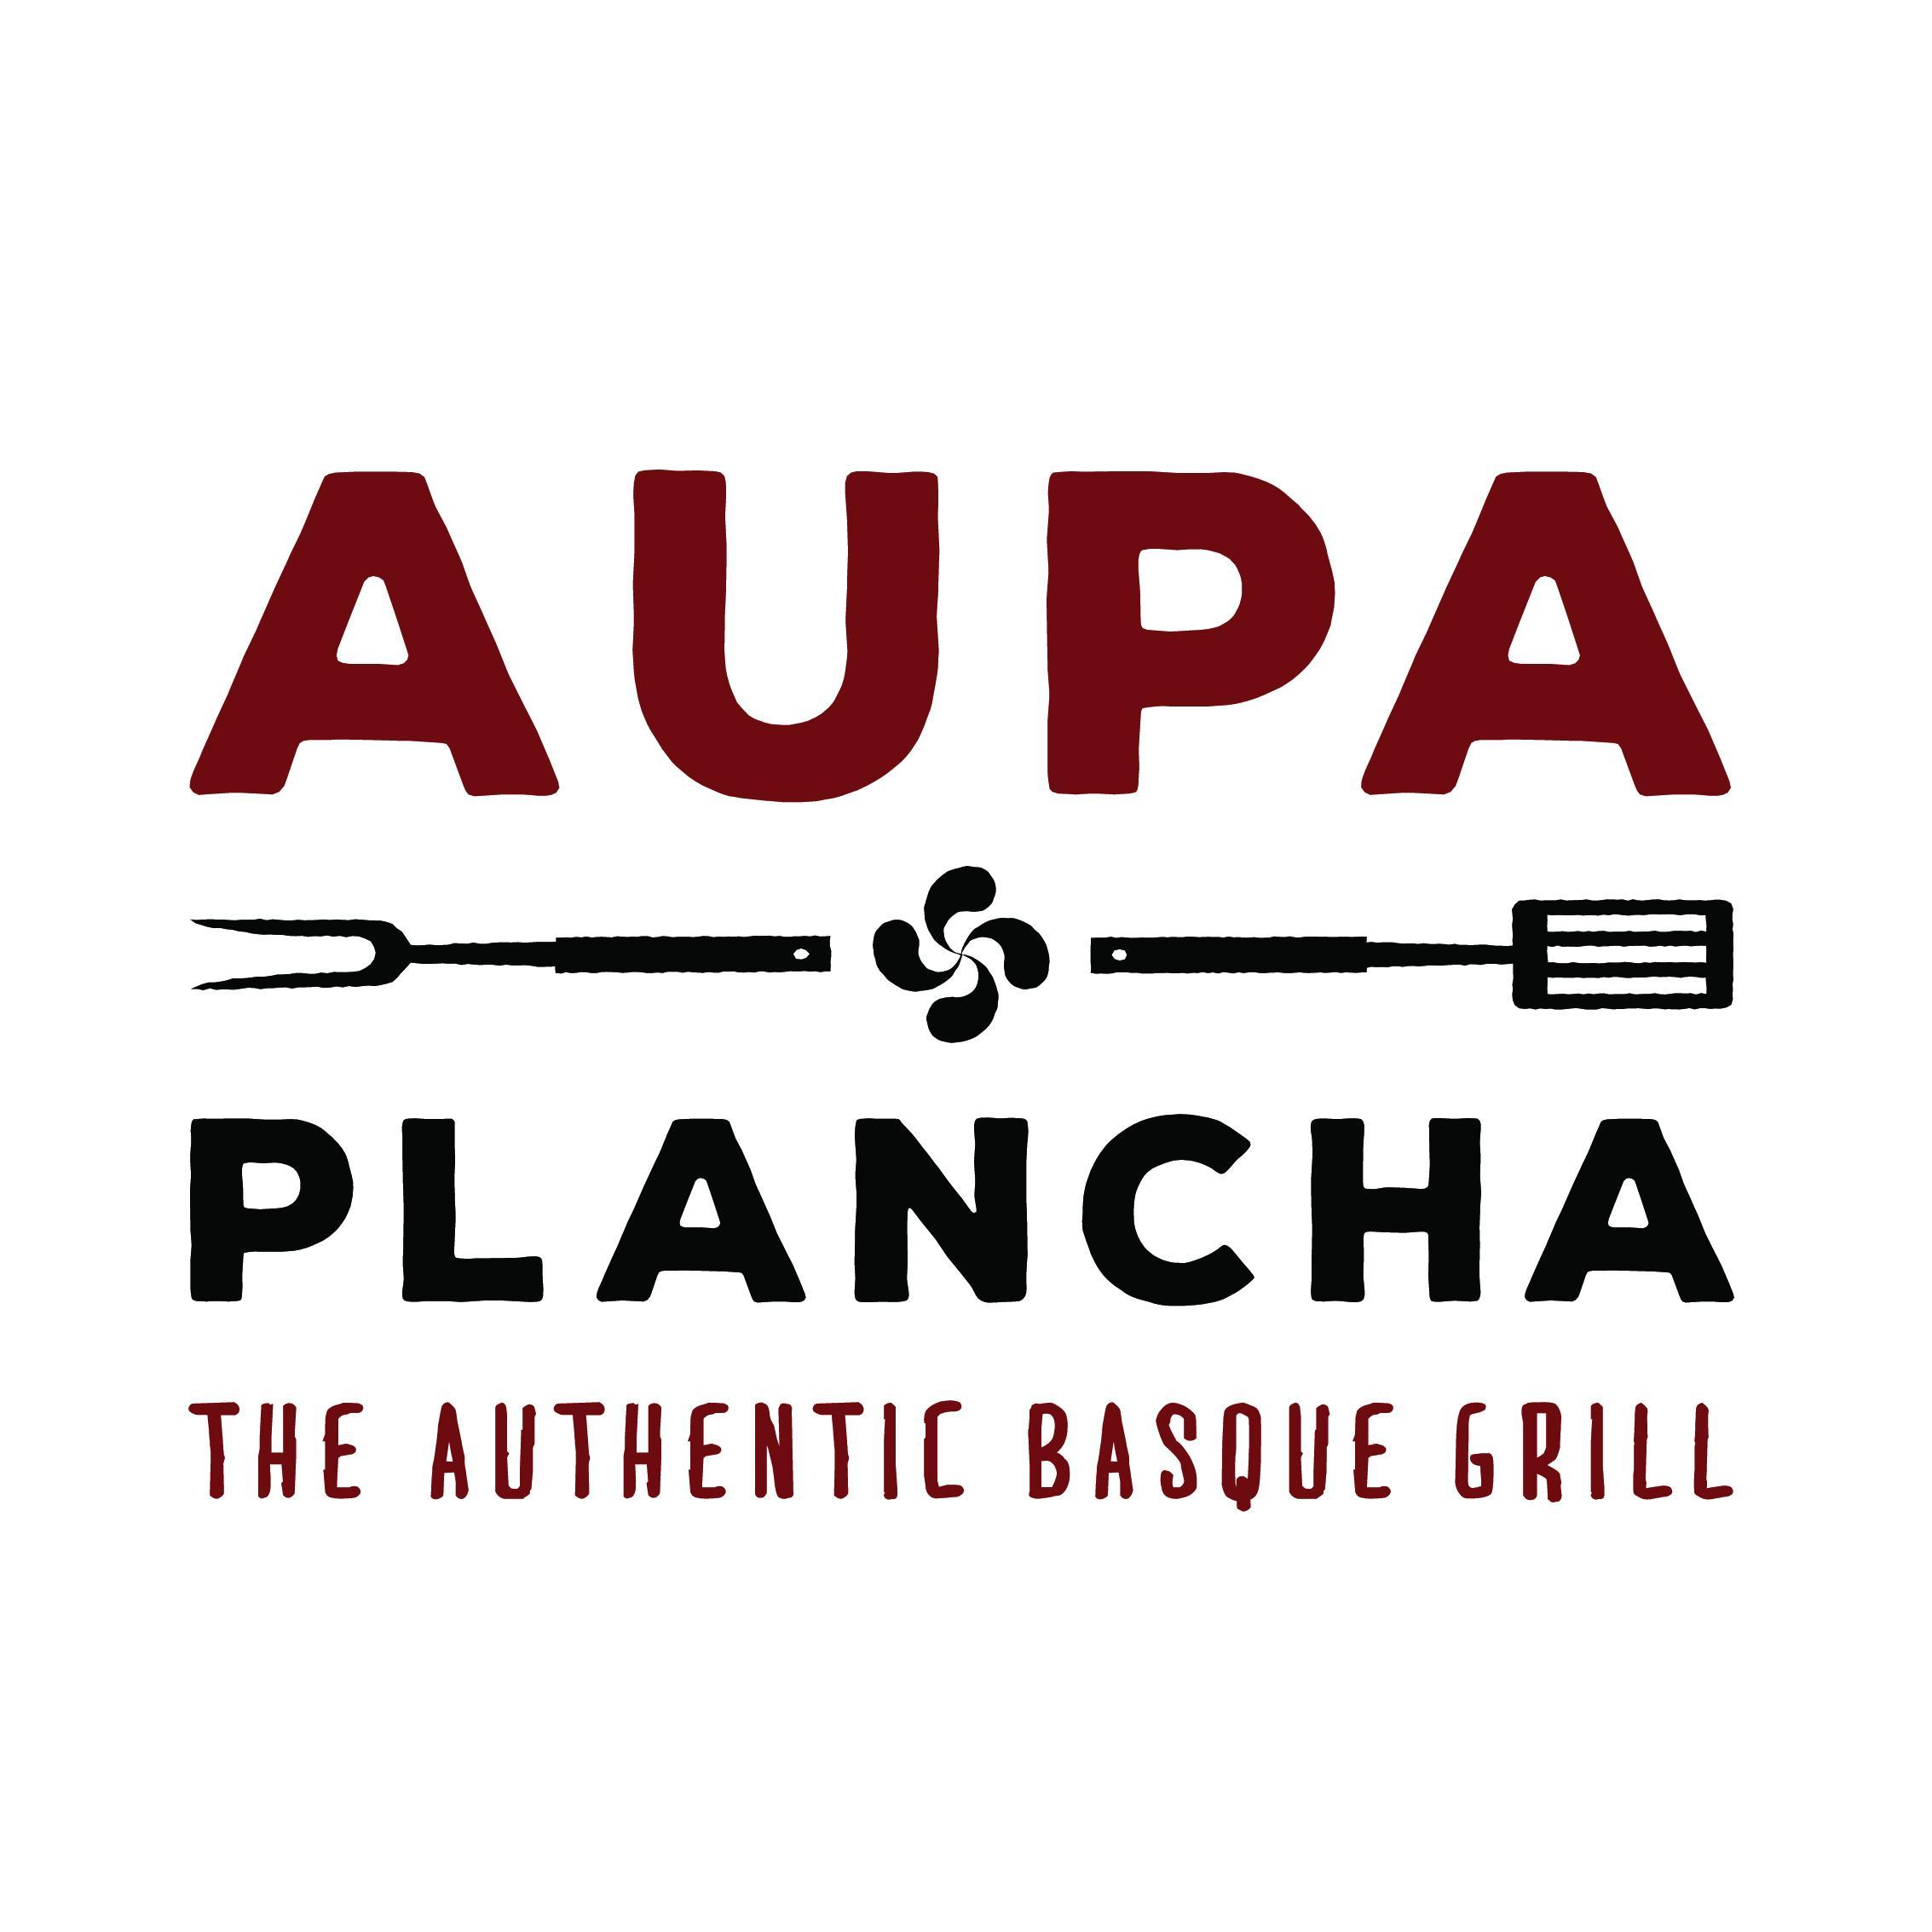 The Aupa Plancha flat top grill is THE authentic Basque grill sold in North America.  You know it's a celebration when you hear Aupa!